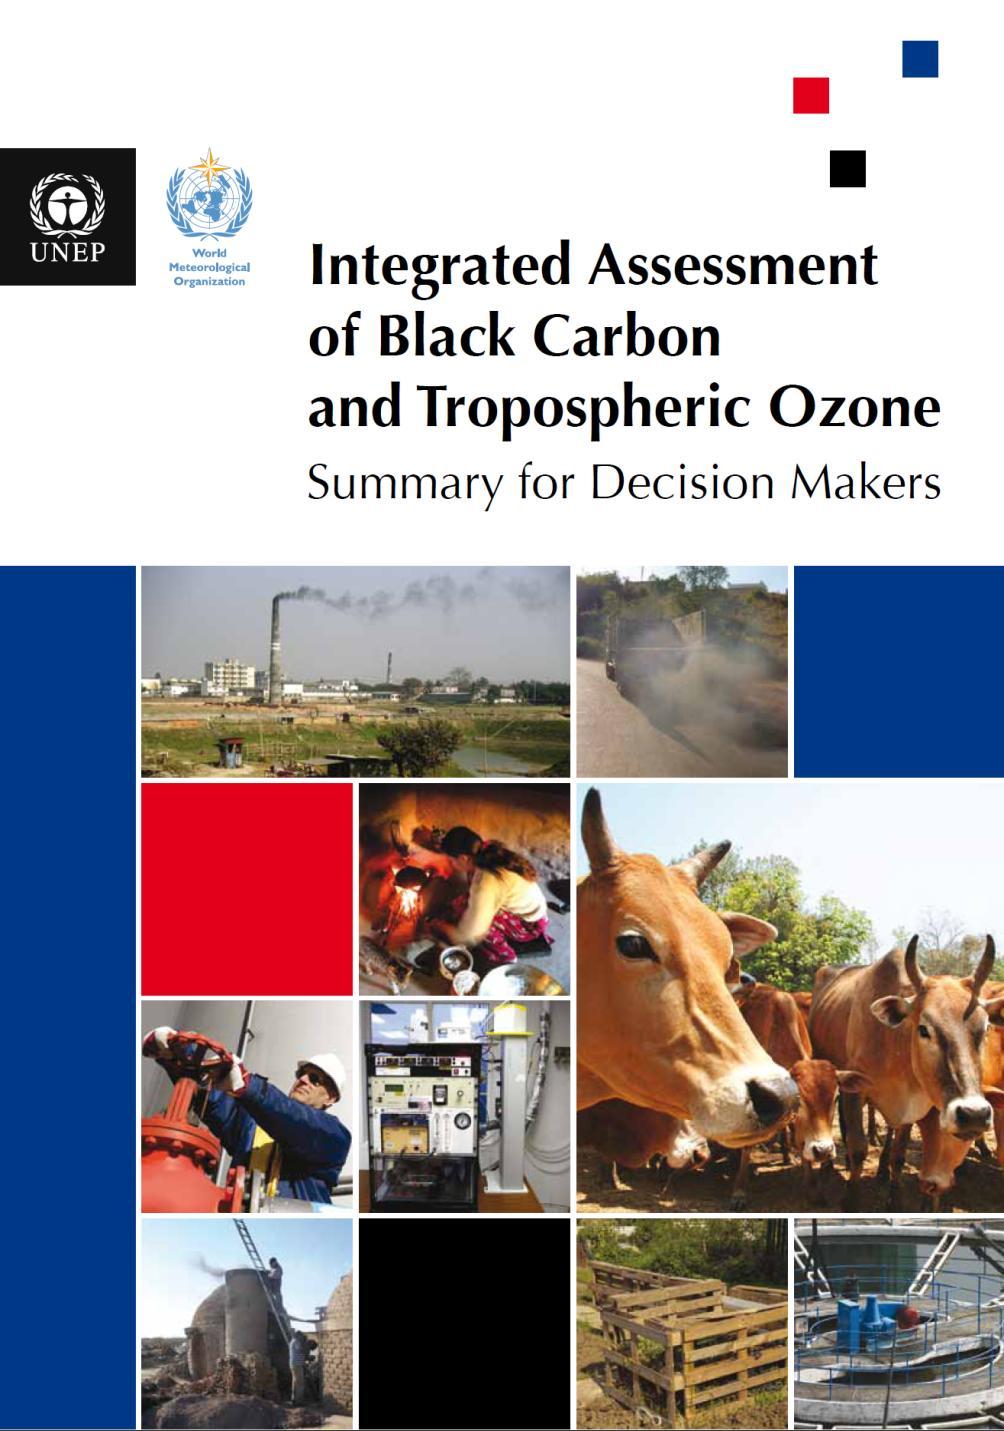 RECENT GLOBAL REPORTS UNEP/WMO Integrated Assessment of Black Carbon and Tropospheric Ozone Johan Kuylenstierna, Stockholm Environment Institute, SEI,